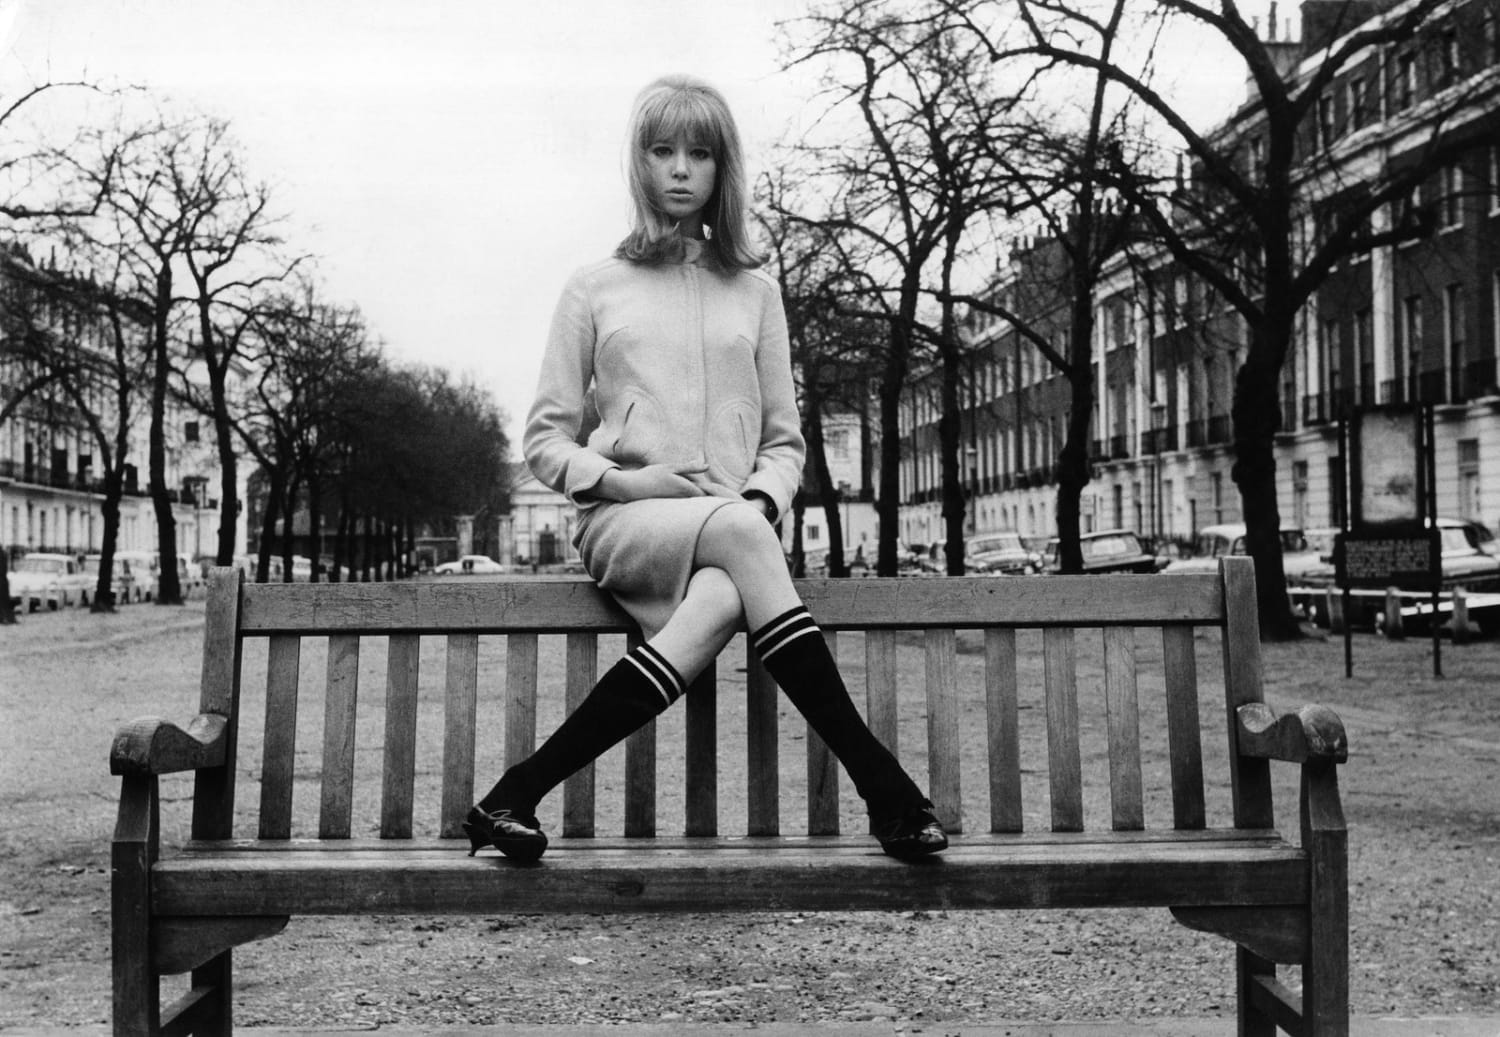 Pattie Boyd, 1964 - 1 Woman inspired 2 musical greats to write 3 hit songs – “Something”, George Harrison (her husband) – “Layla”, Eric Clapton (complicated) –- “Wonderful Tonight”, Eric Clapton (her boyfriend) - Photo credit Michael Ward